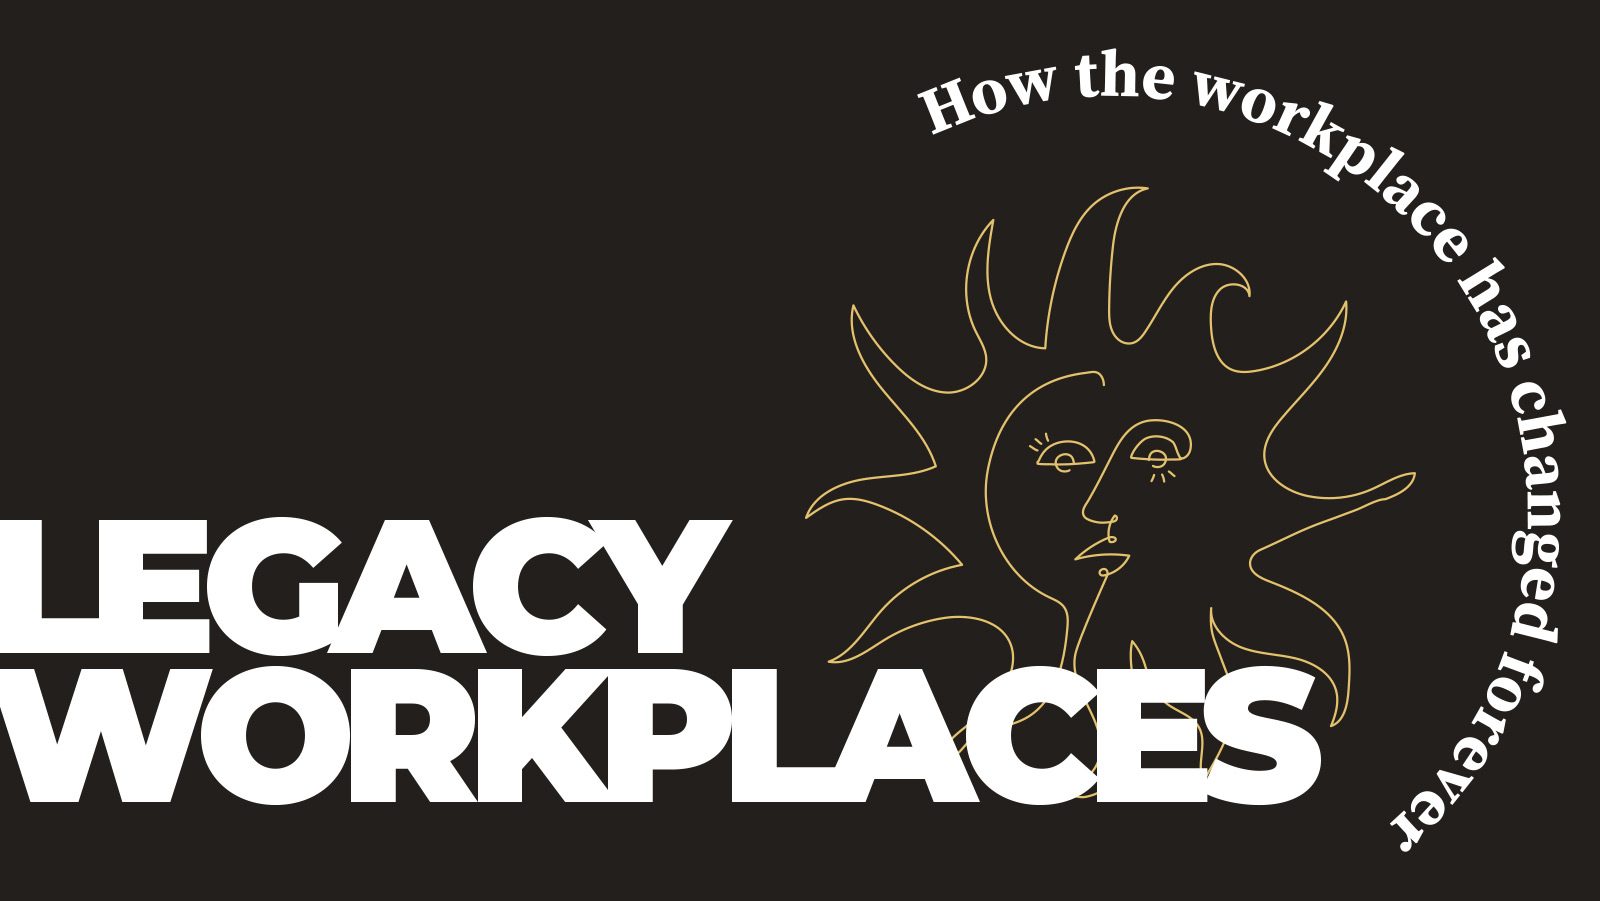 Insight Report Issue 5 – ‘Legacy Workplaces’